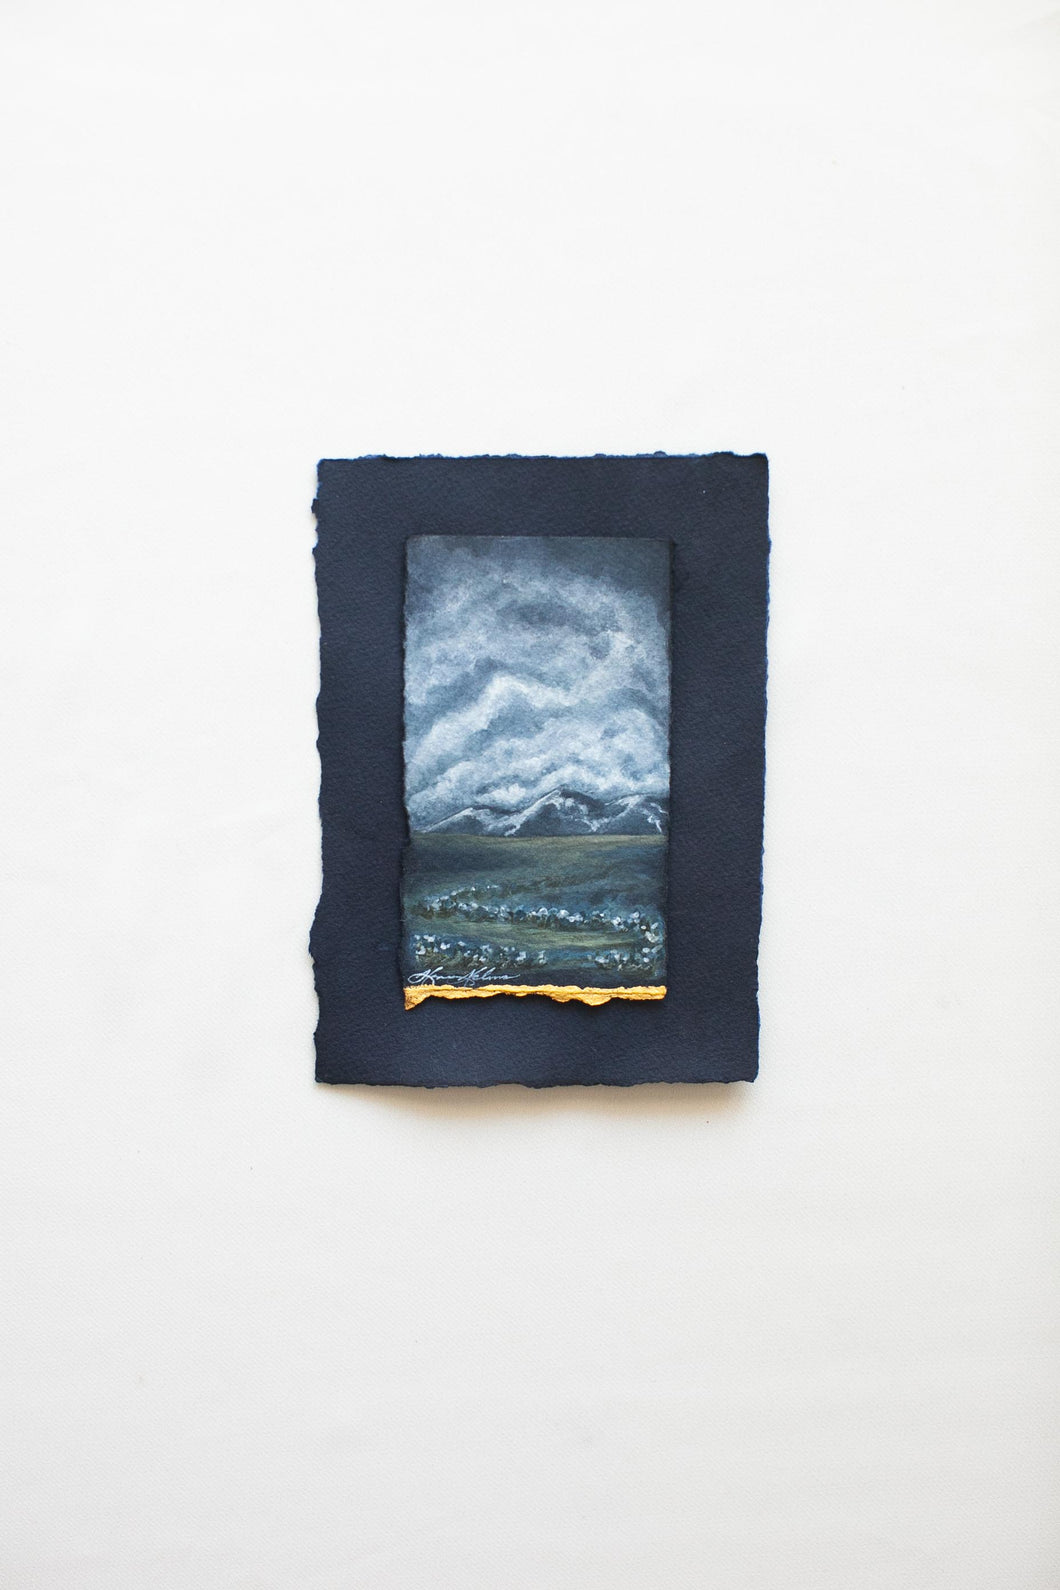 Mountains in Blue - 24k gold